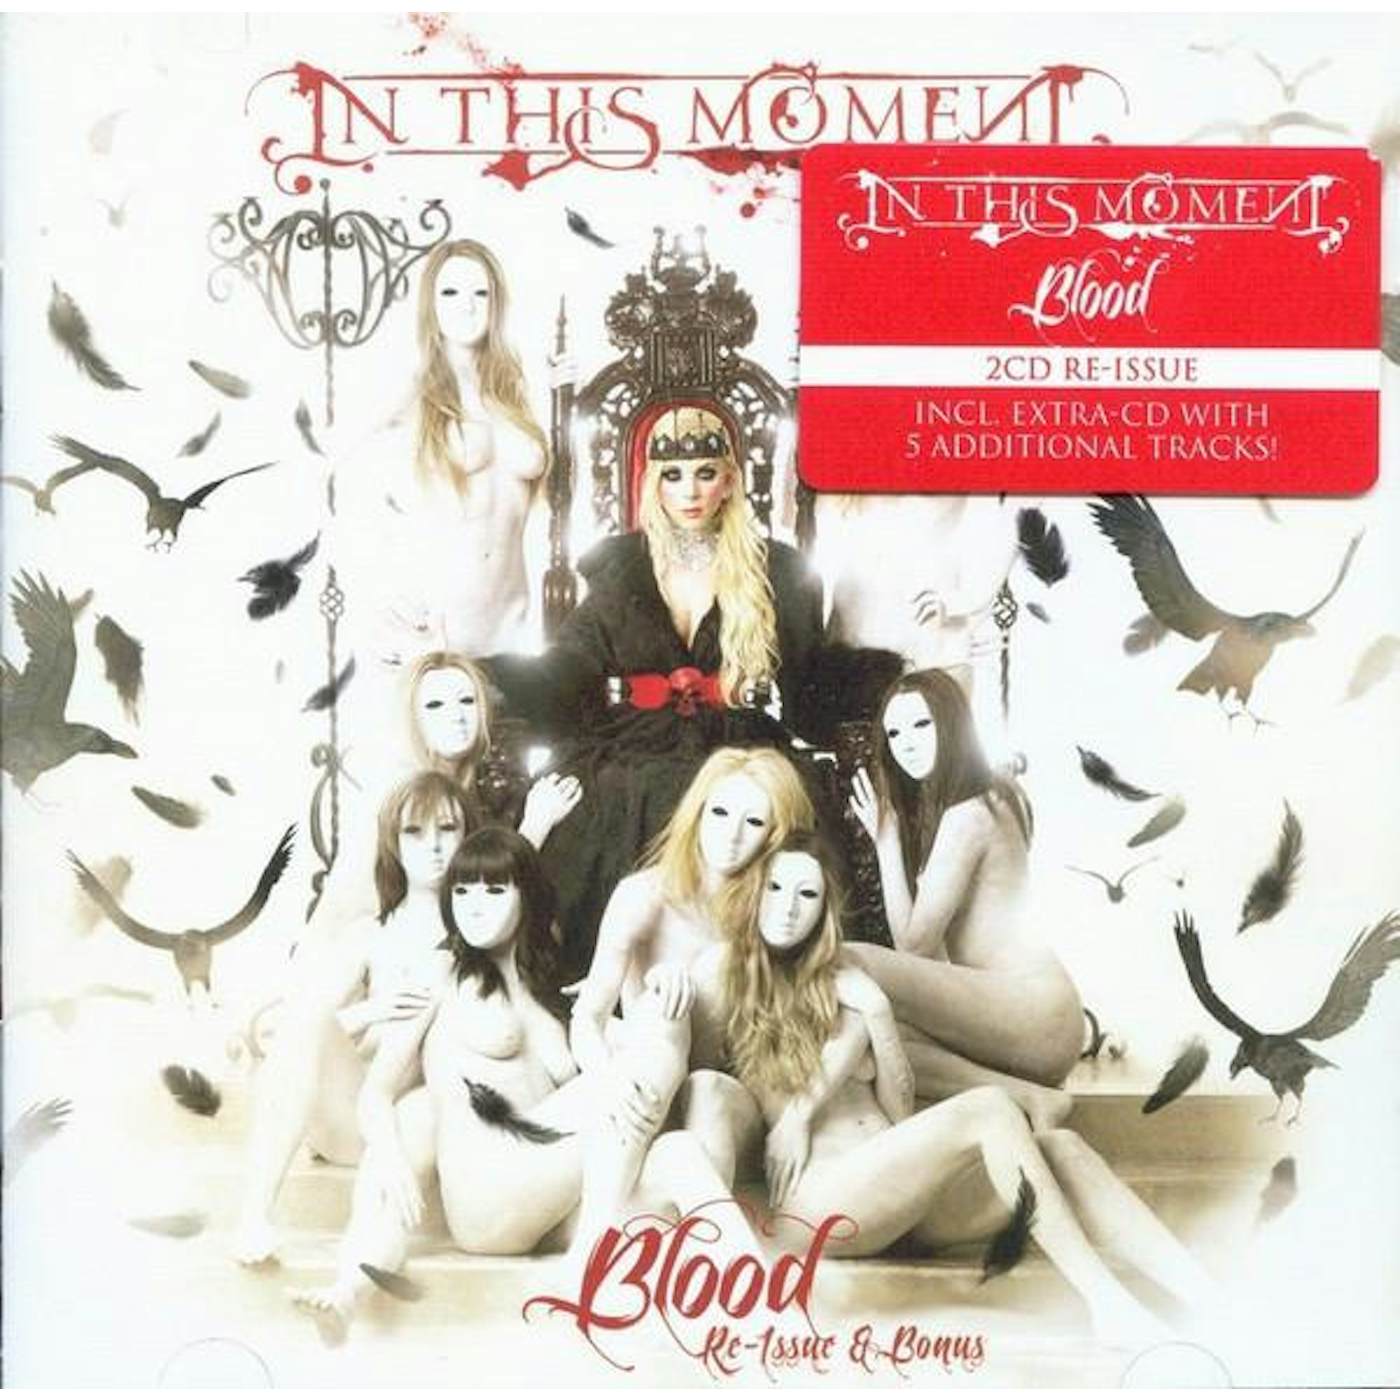 In This Moment BLOOD (RE-ISSUE + BONUS) CD